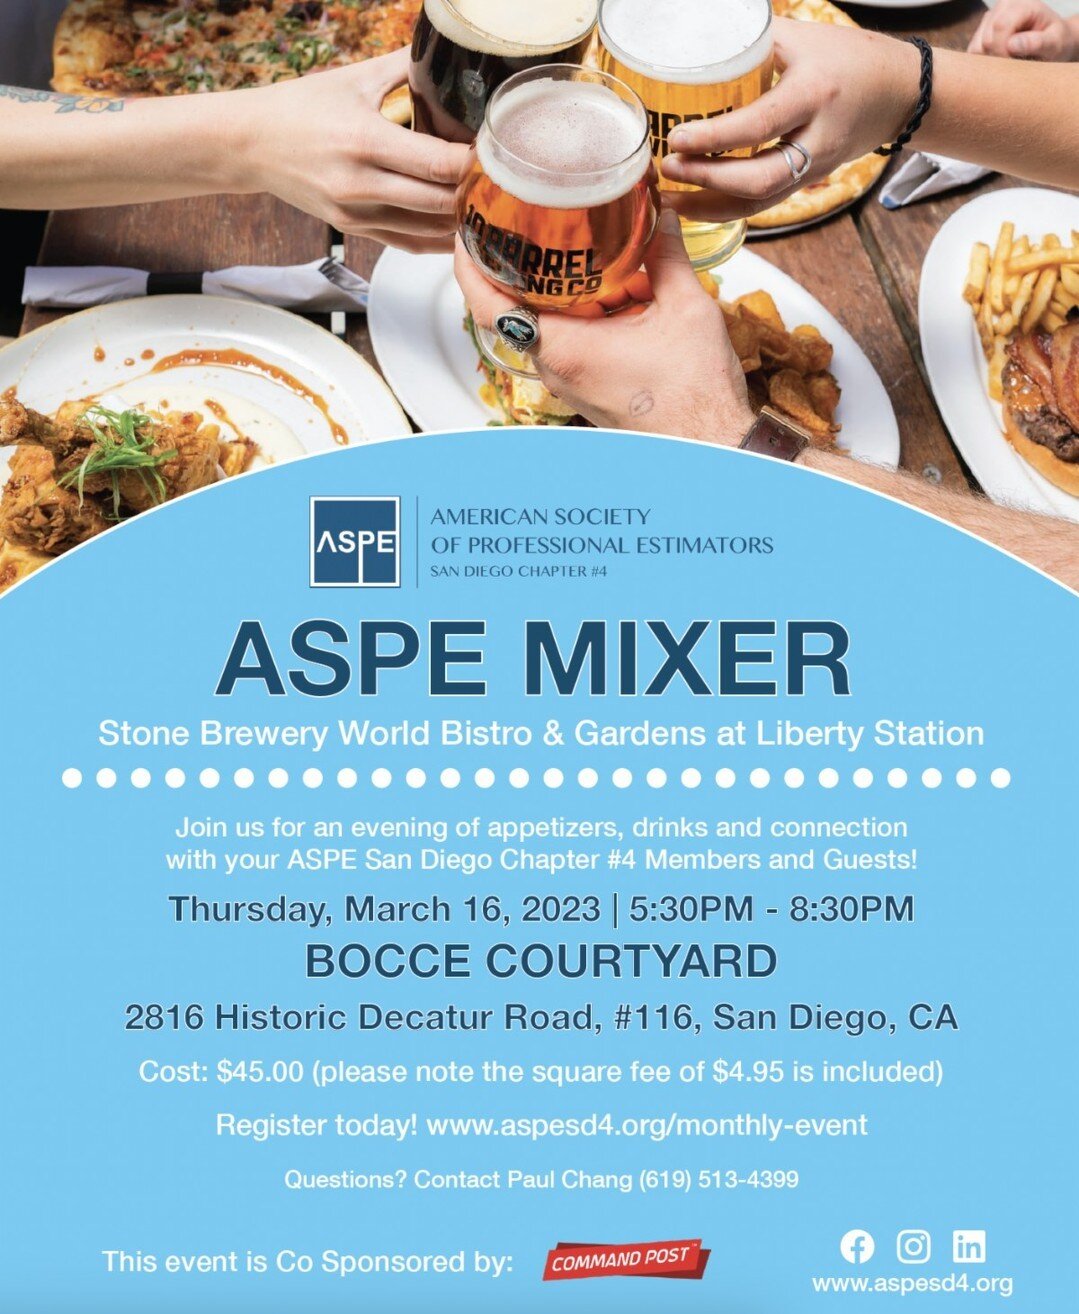 ASPE San Diego Chapter #4 Members! We are happy to announce that we have officially sold out on this month's mixer event at Stone Brewery, Liberty Station.

We look forward to seeing you there: This Thursday, March 16th, 2023 starting at 5:30PM. We a